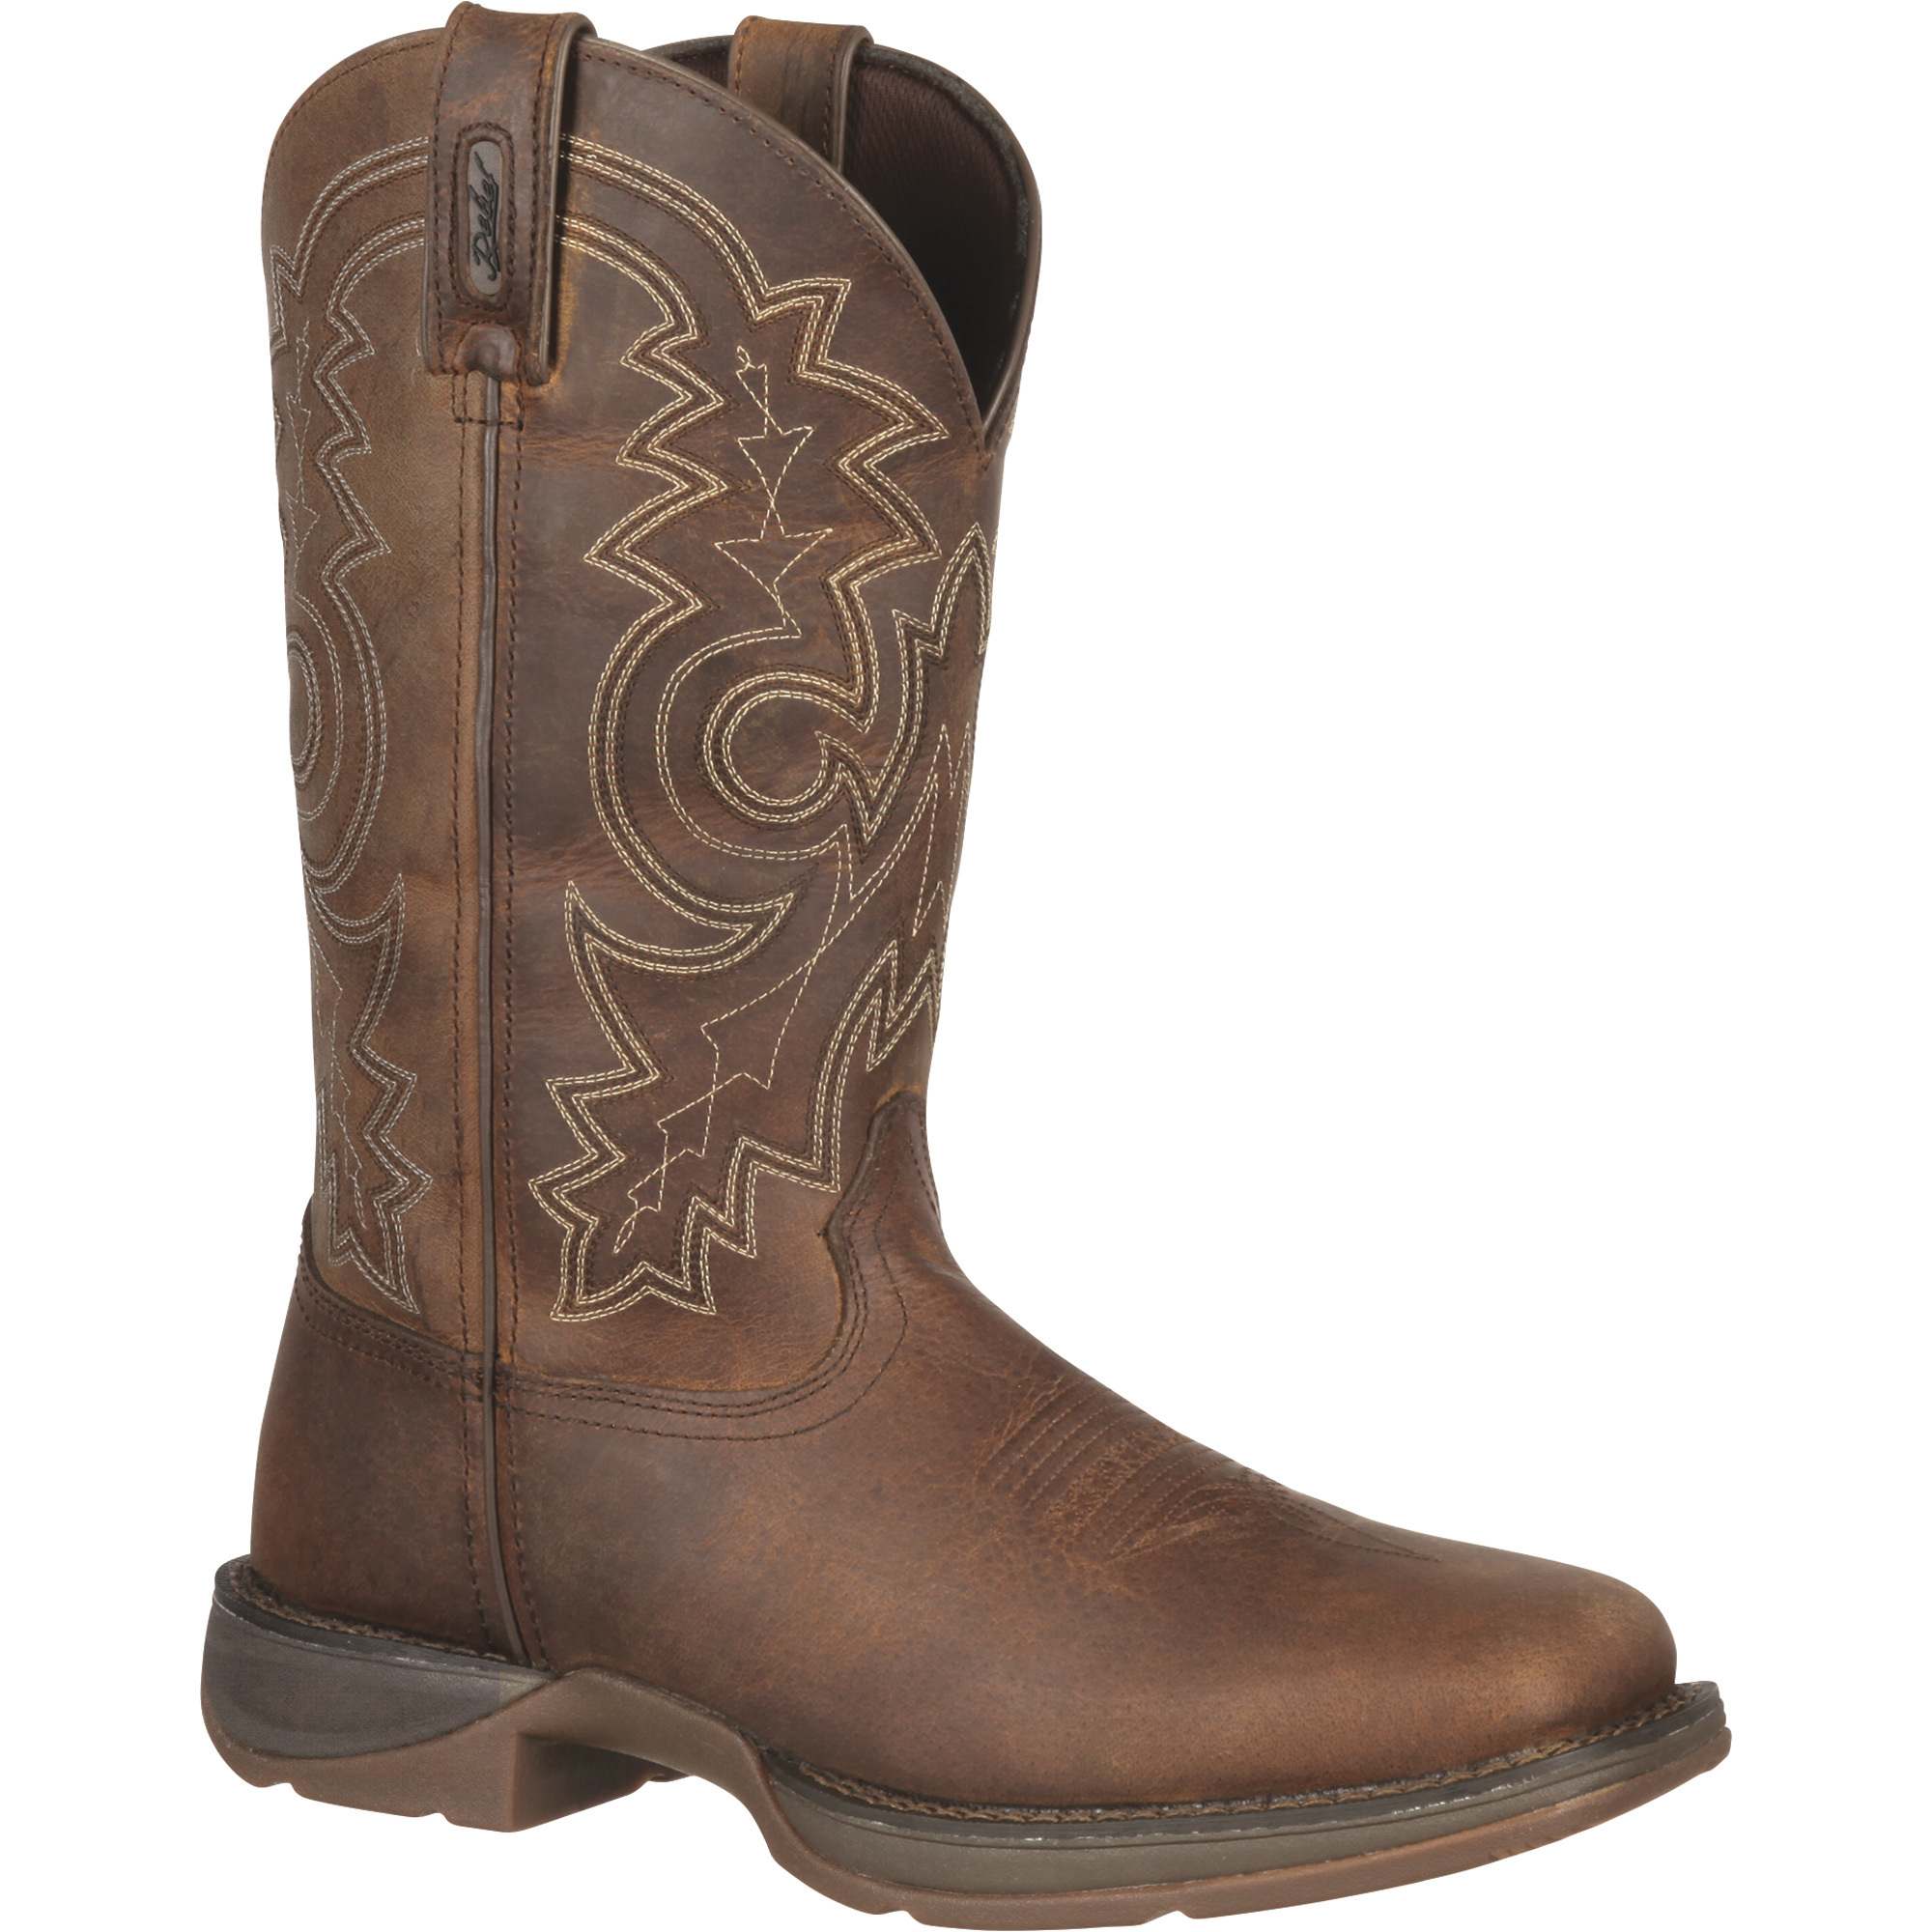 Durango Rebel 11Inch Square-Toe Western Boots - Brown, Size 10 Wide, Model DB4443